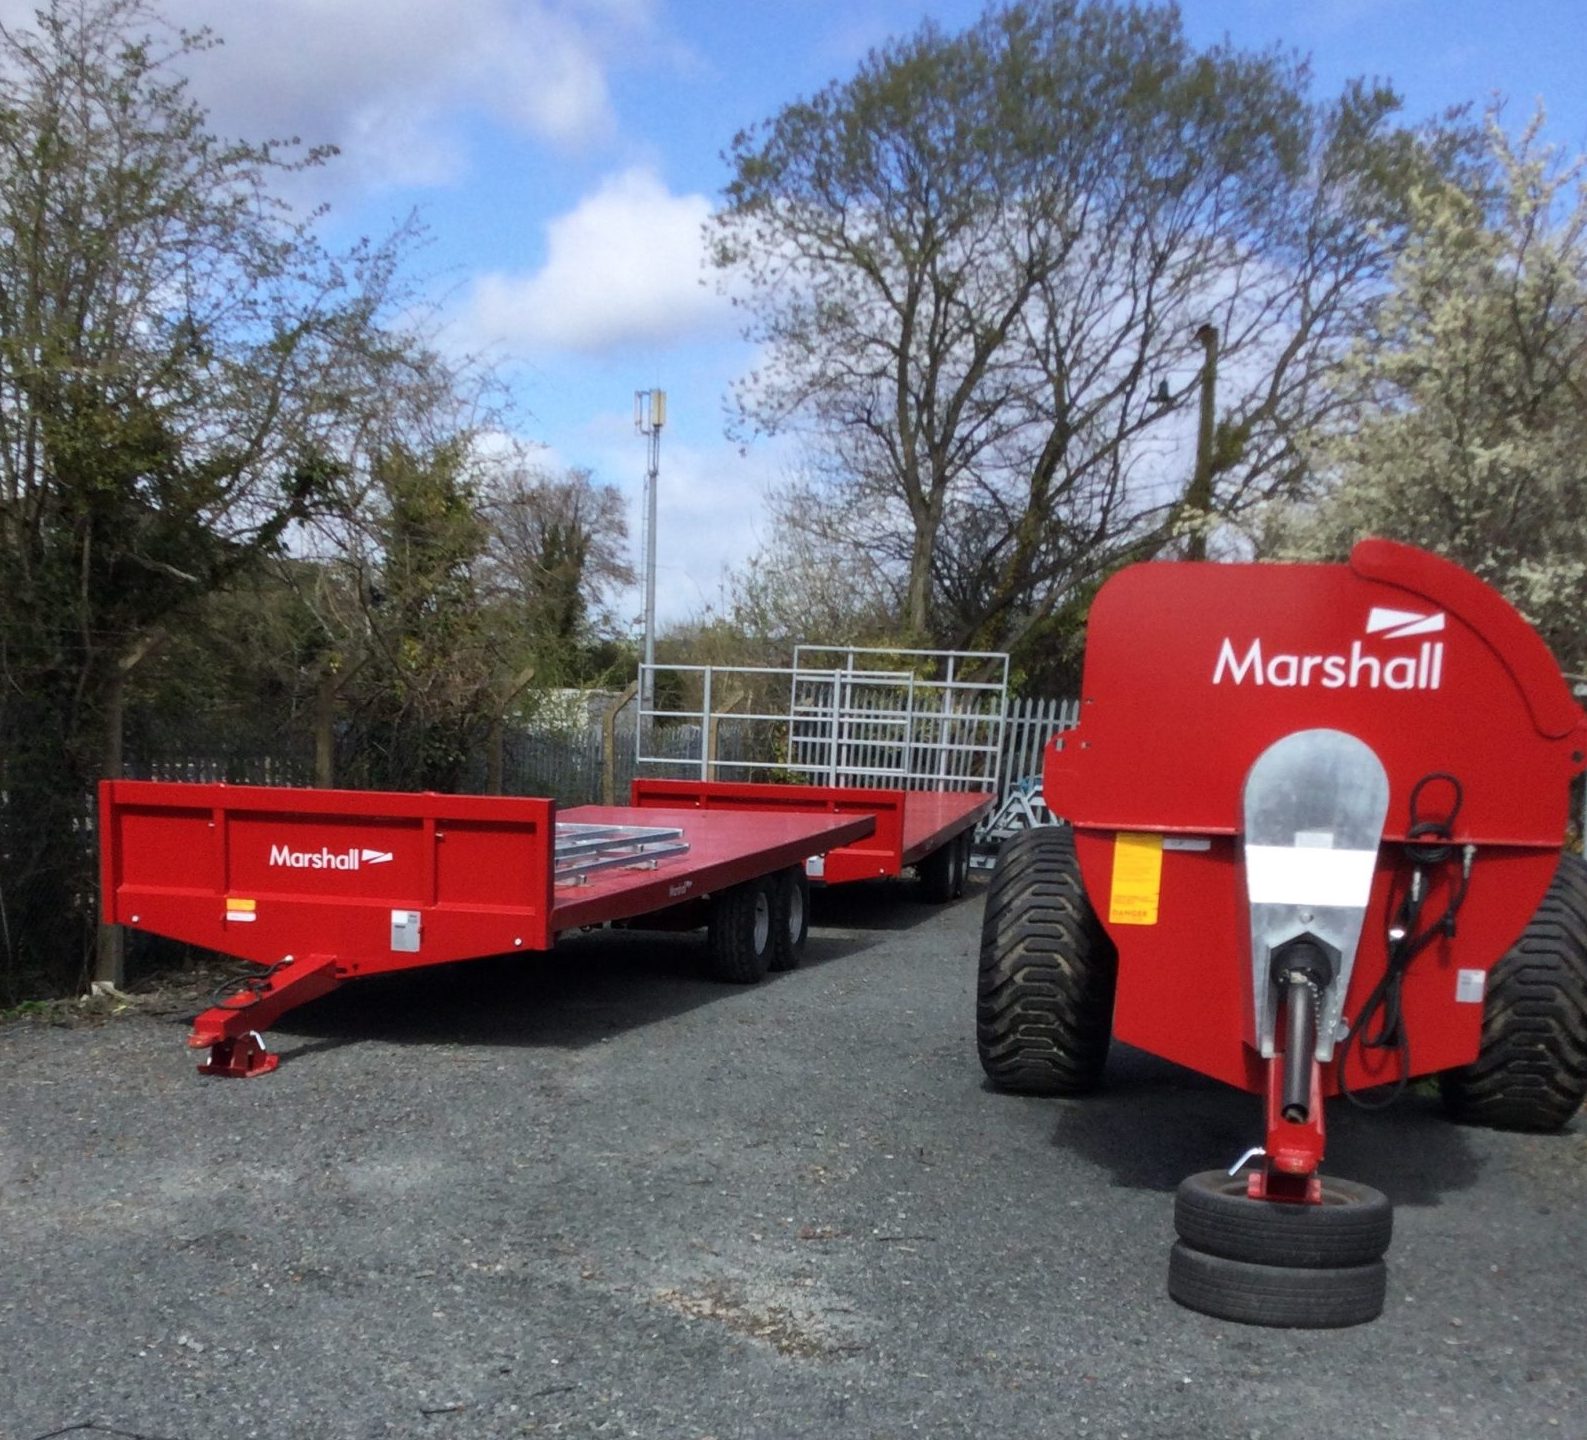 Marshall agricultural equipment at Jim Price Machinery